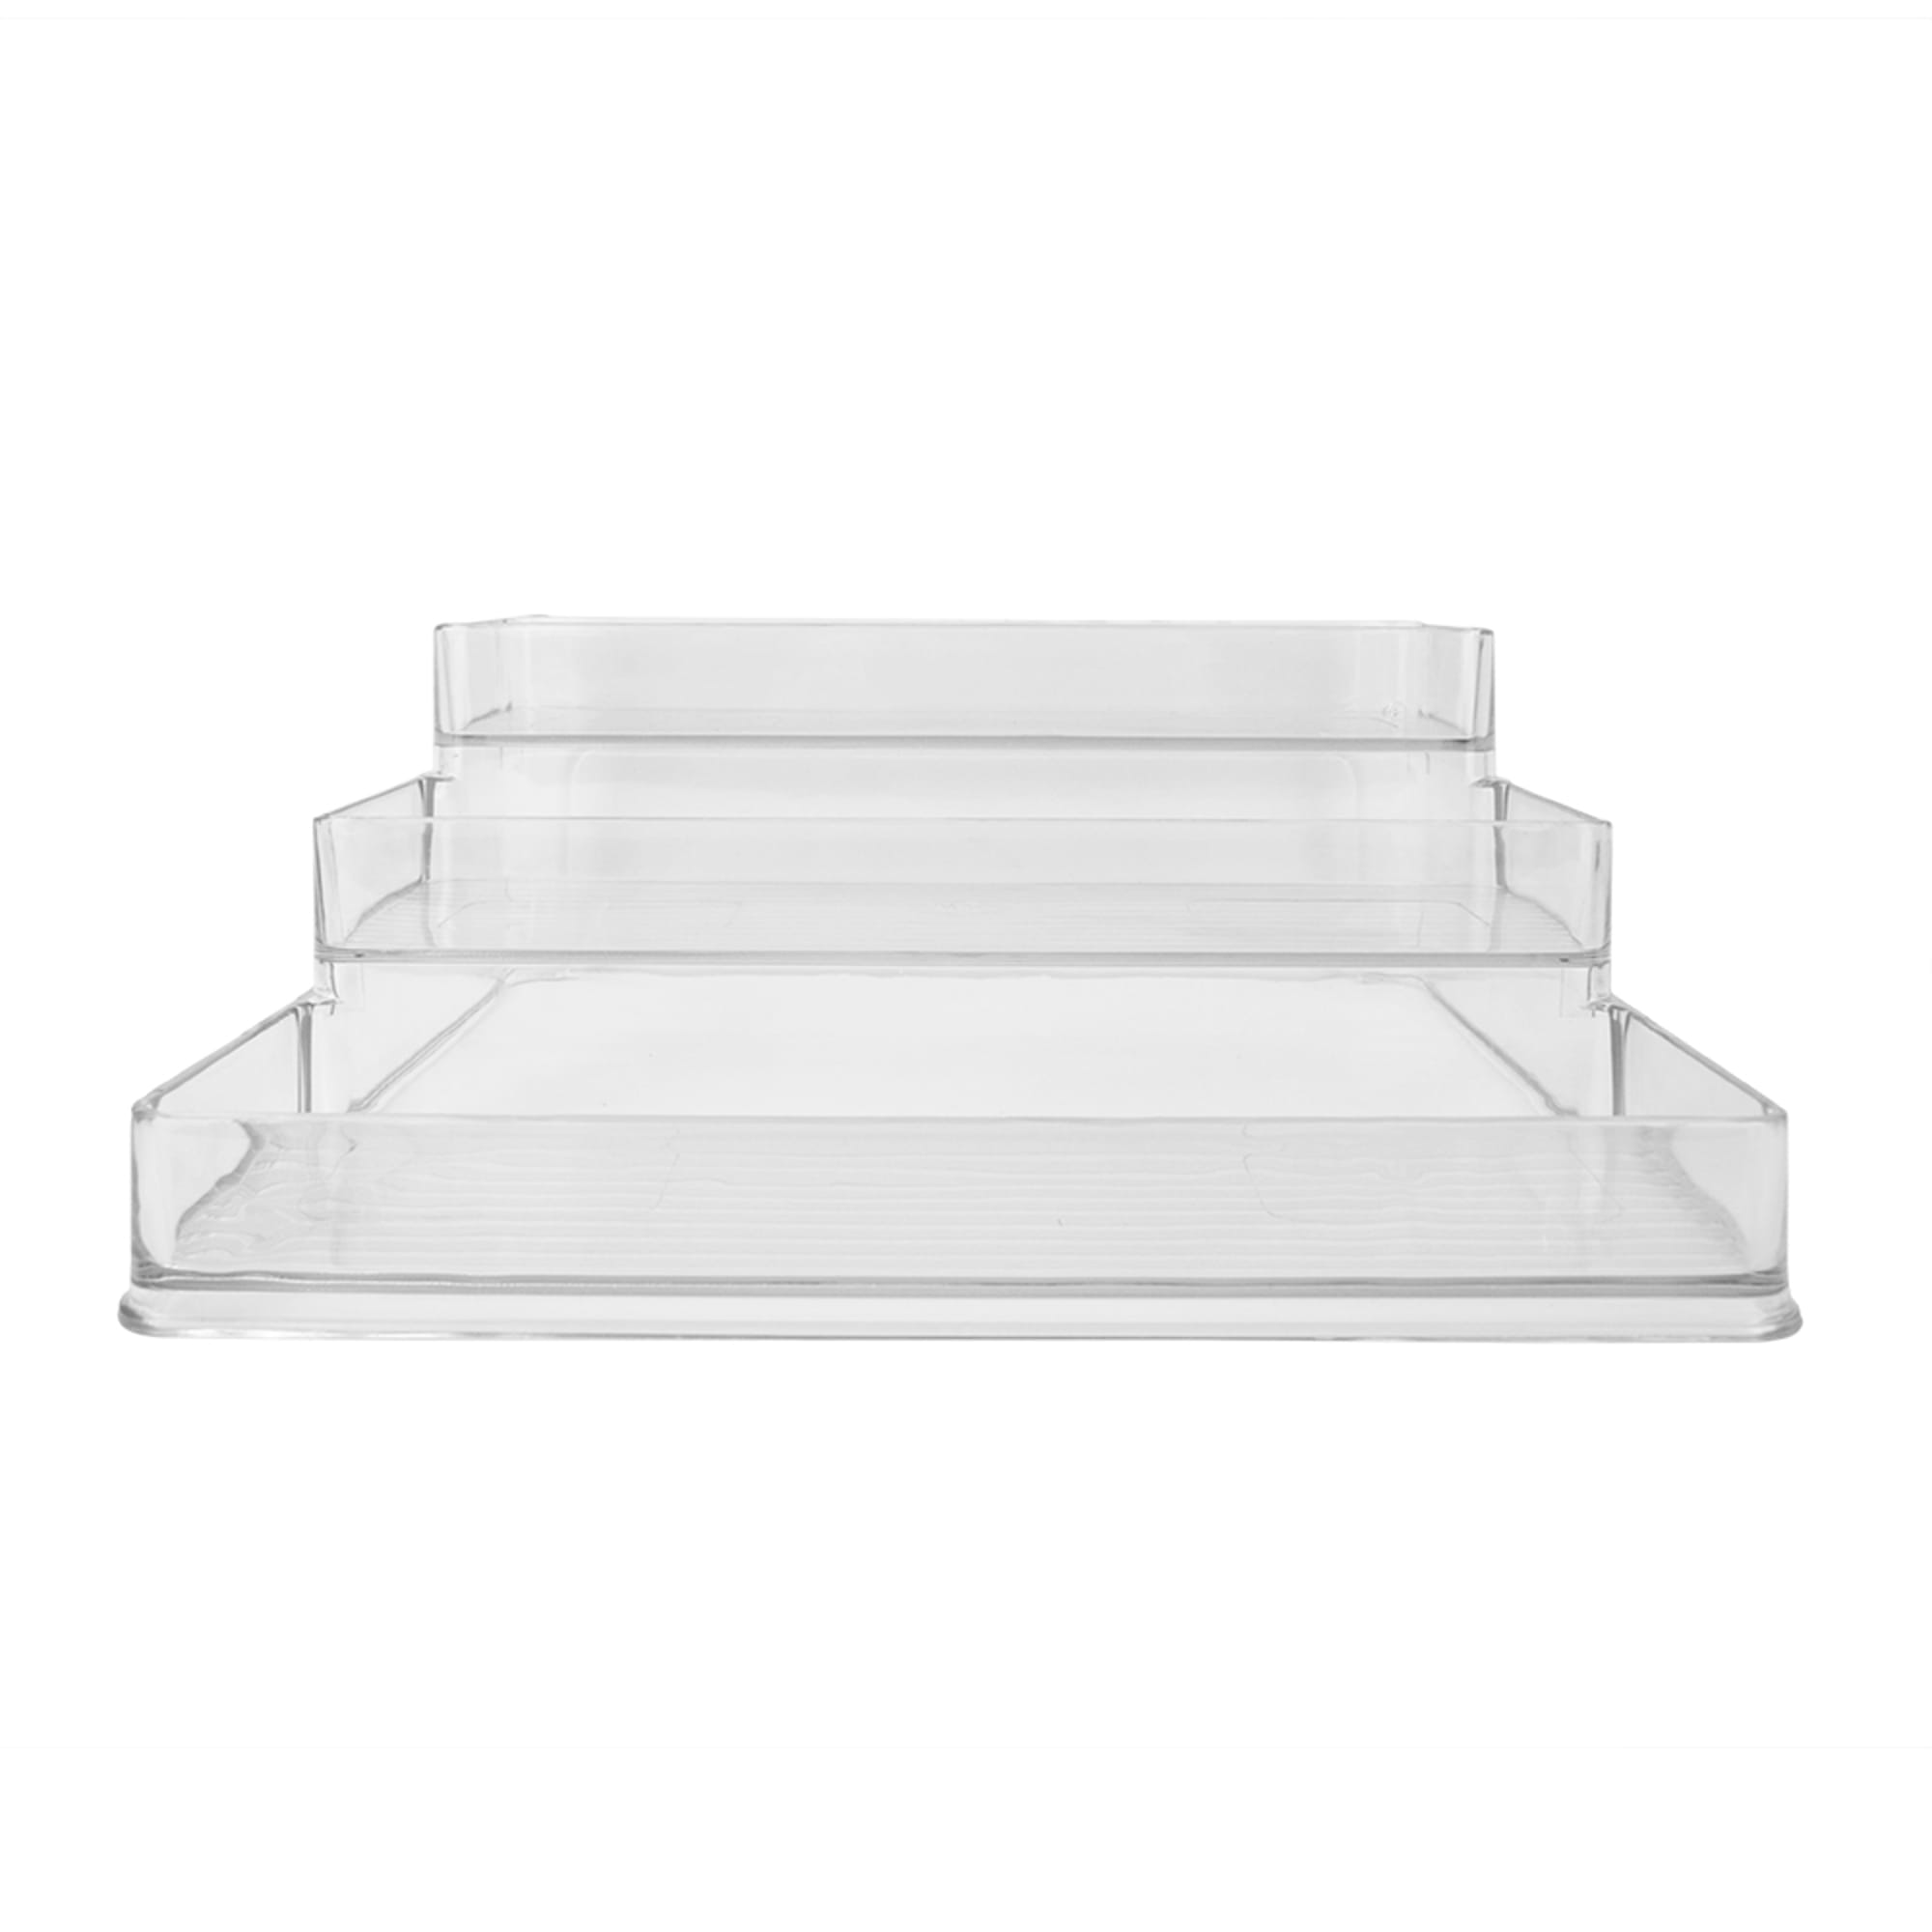 Home Basics 3 Tier Plastic Spice Rack, Clear $4.00 EACH, CASE PACK OF 12